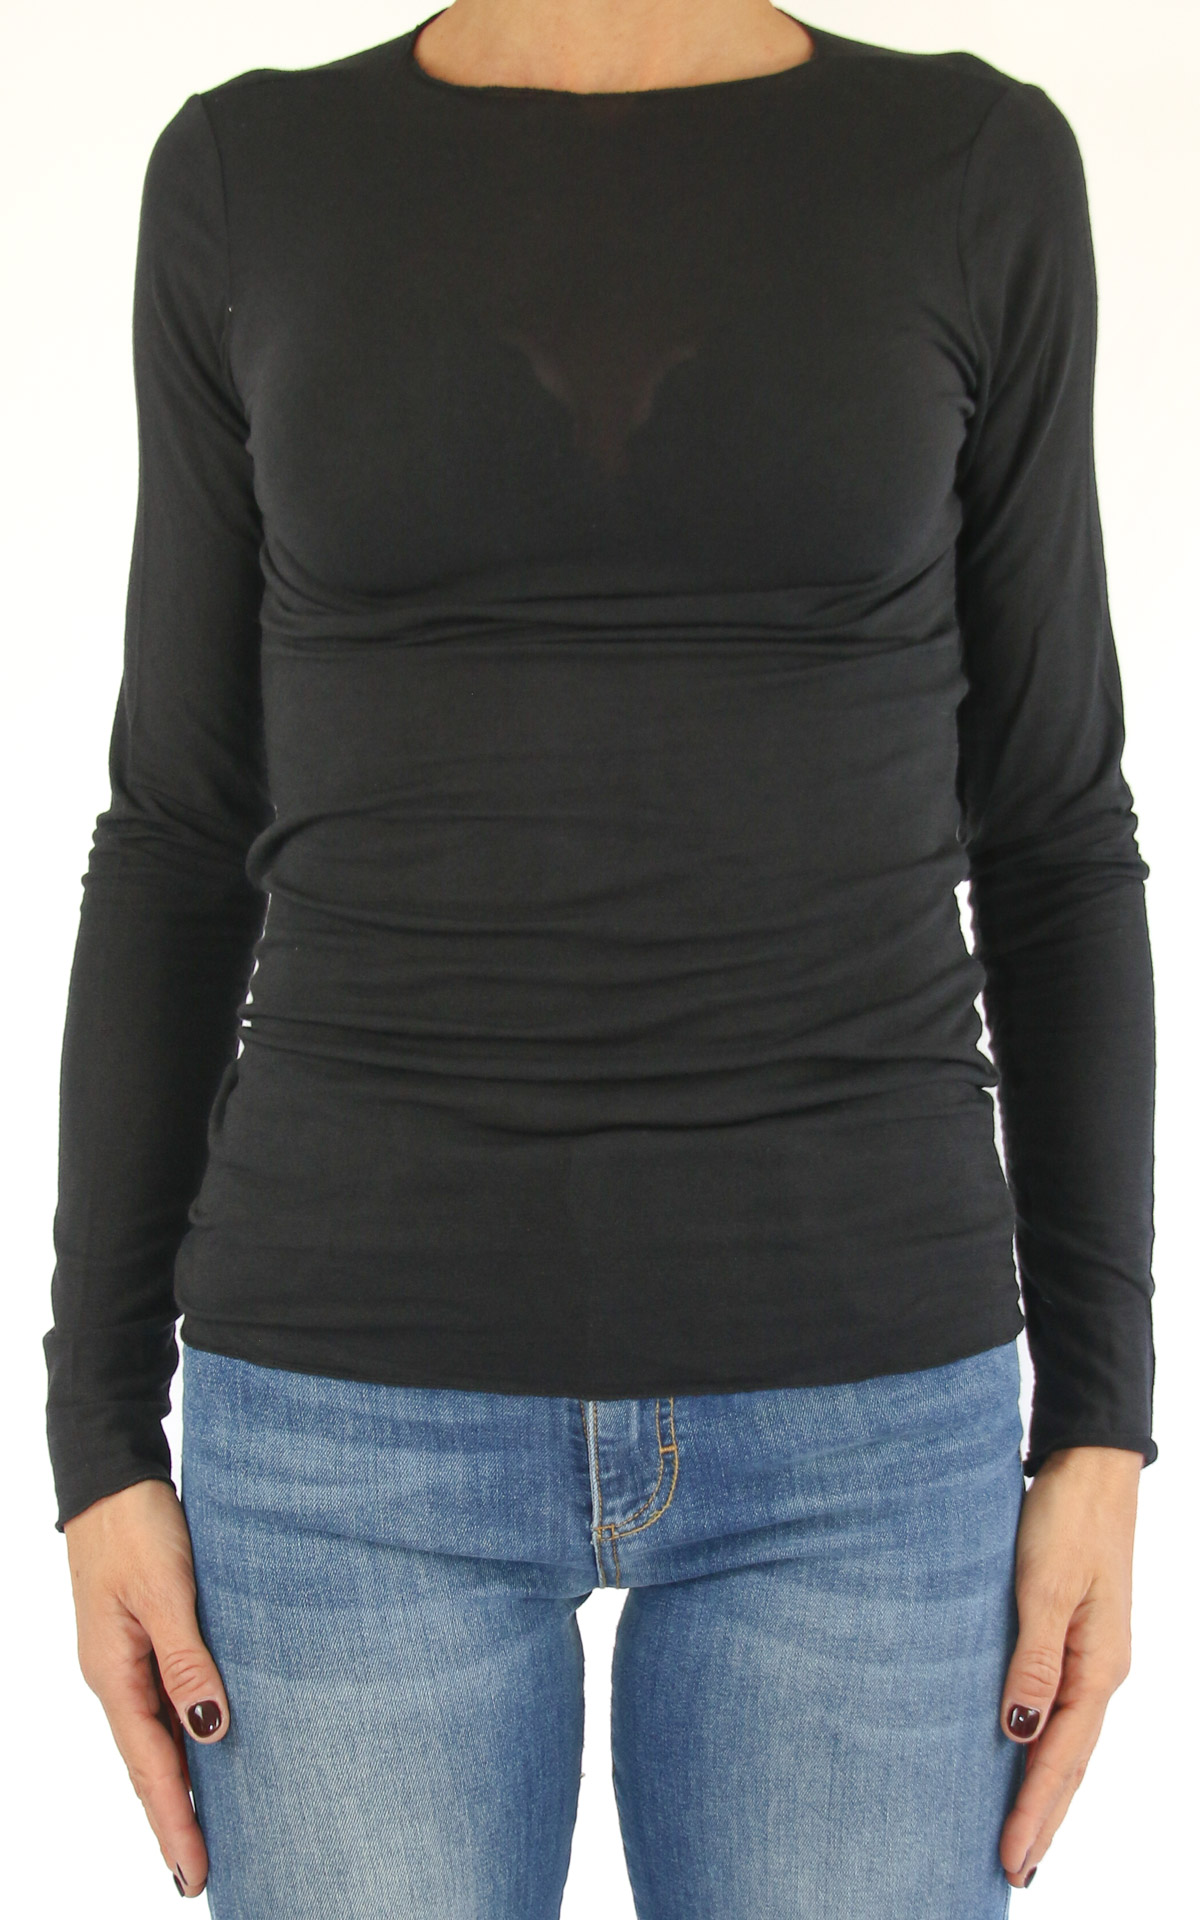 Off-On - t-shirt in cashmere - marrone